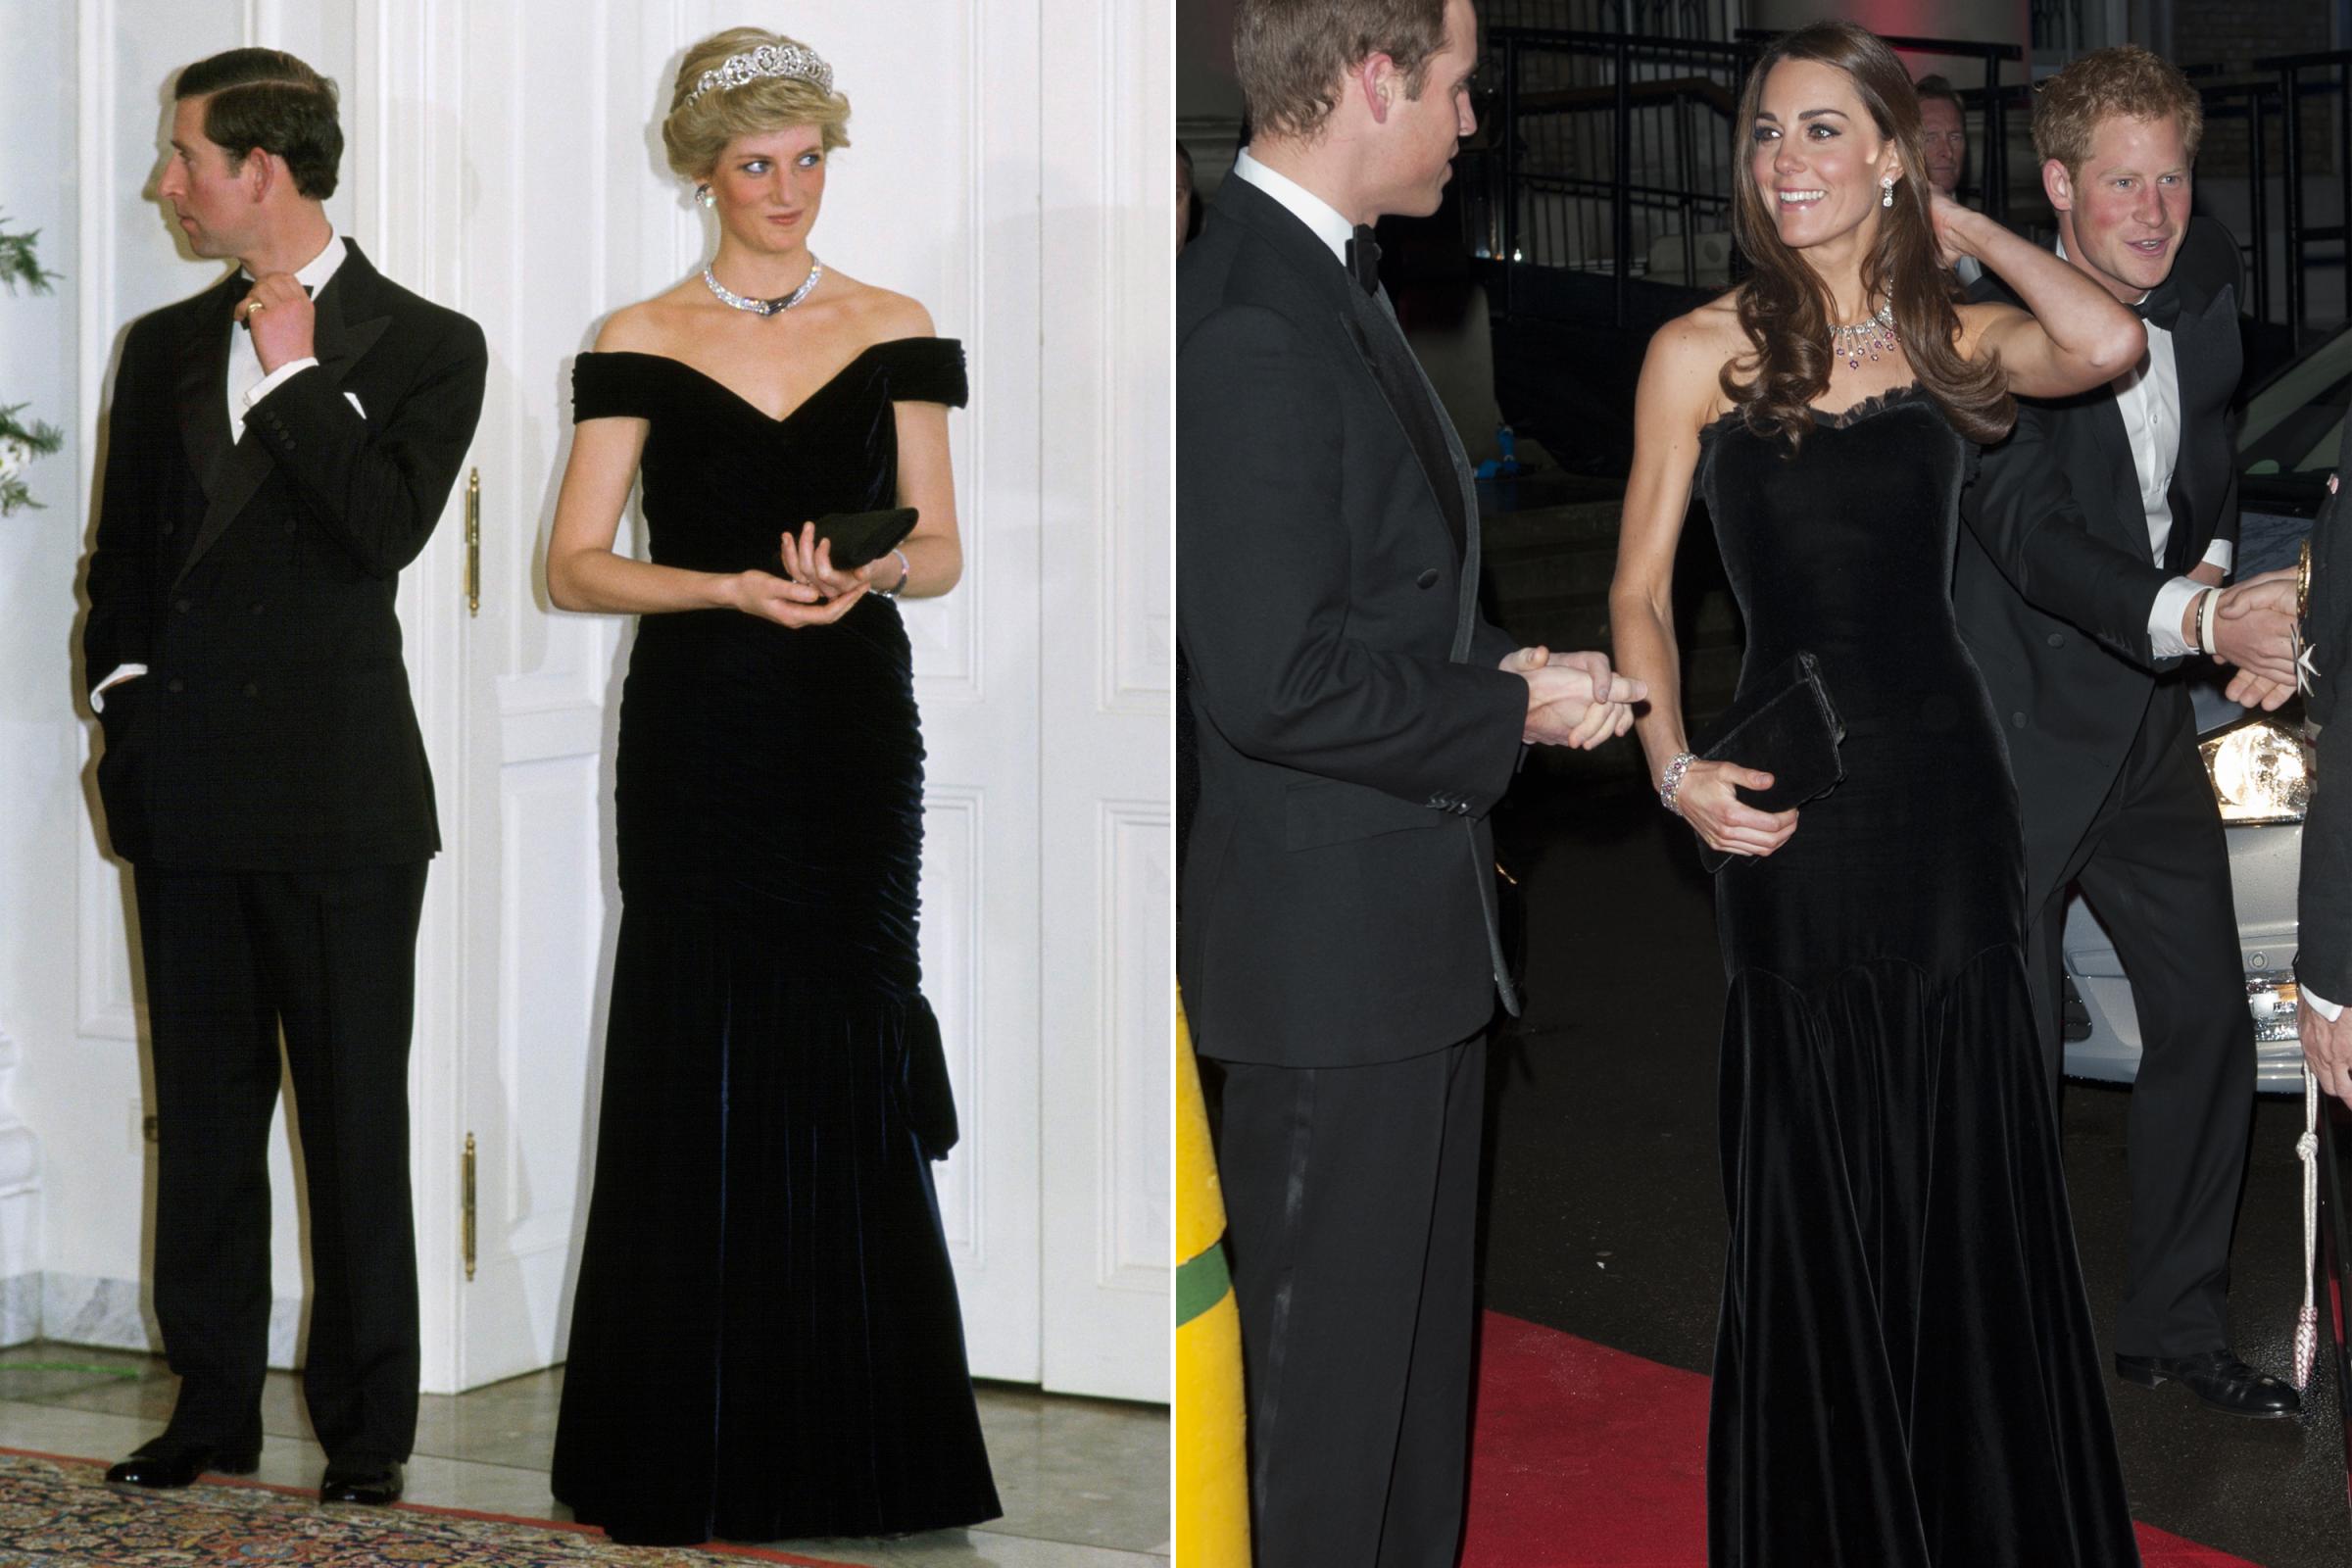 Princess Diana and Kate Duchess of Cambridge similar moments in fashion black gown